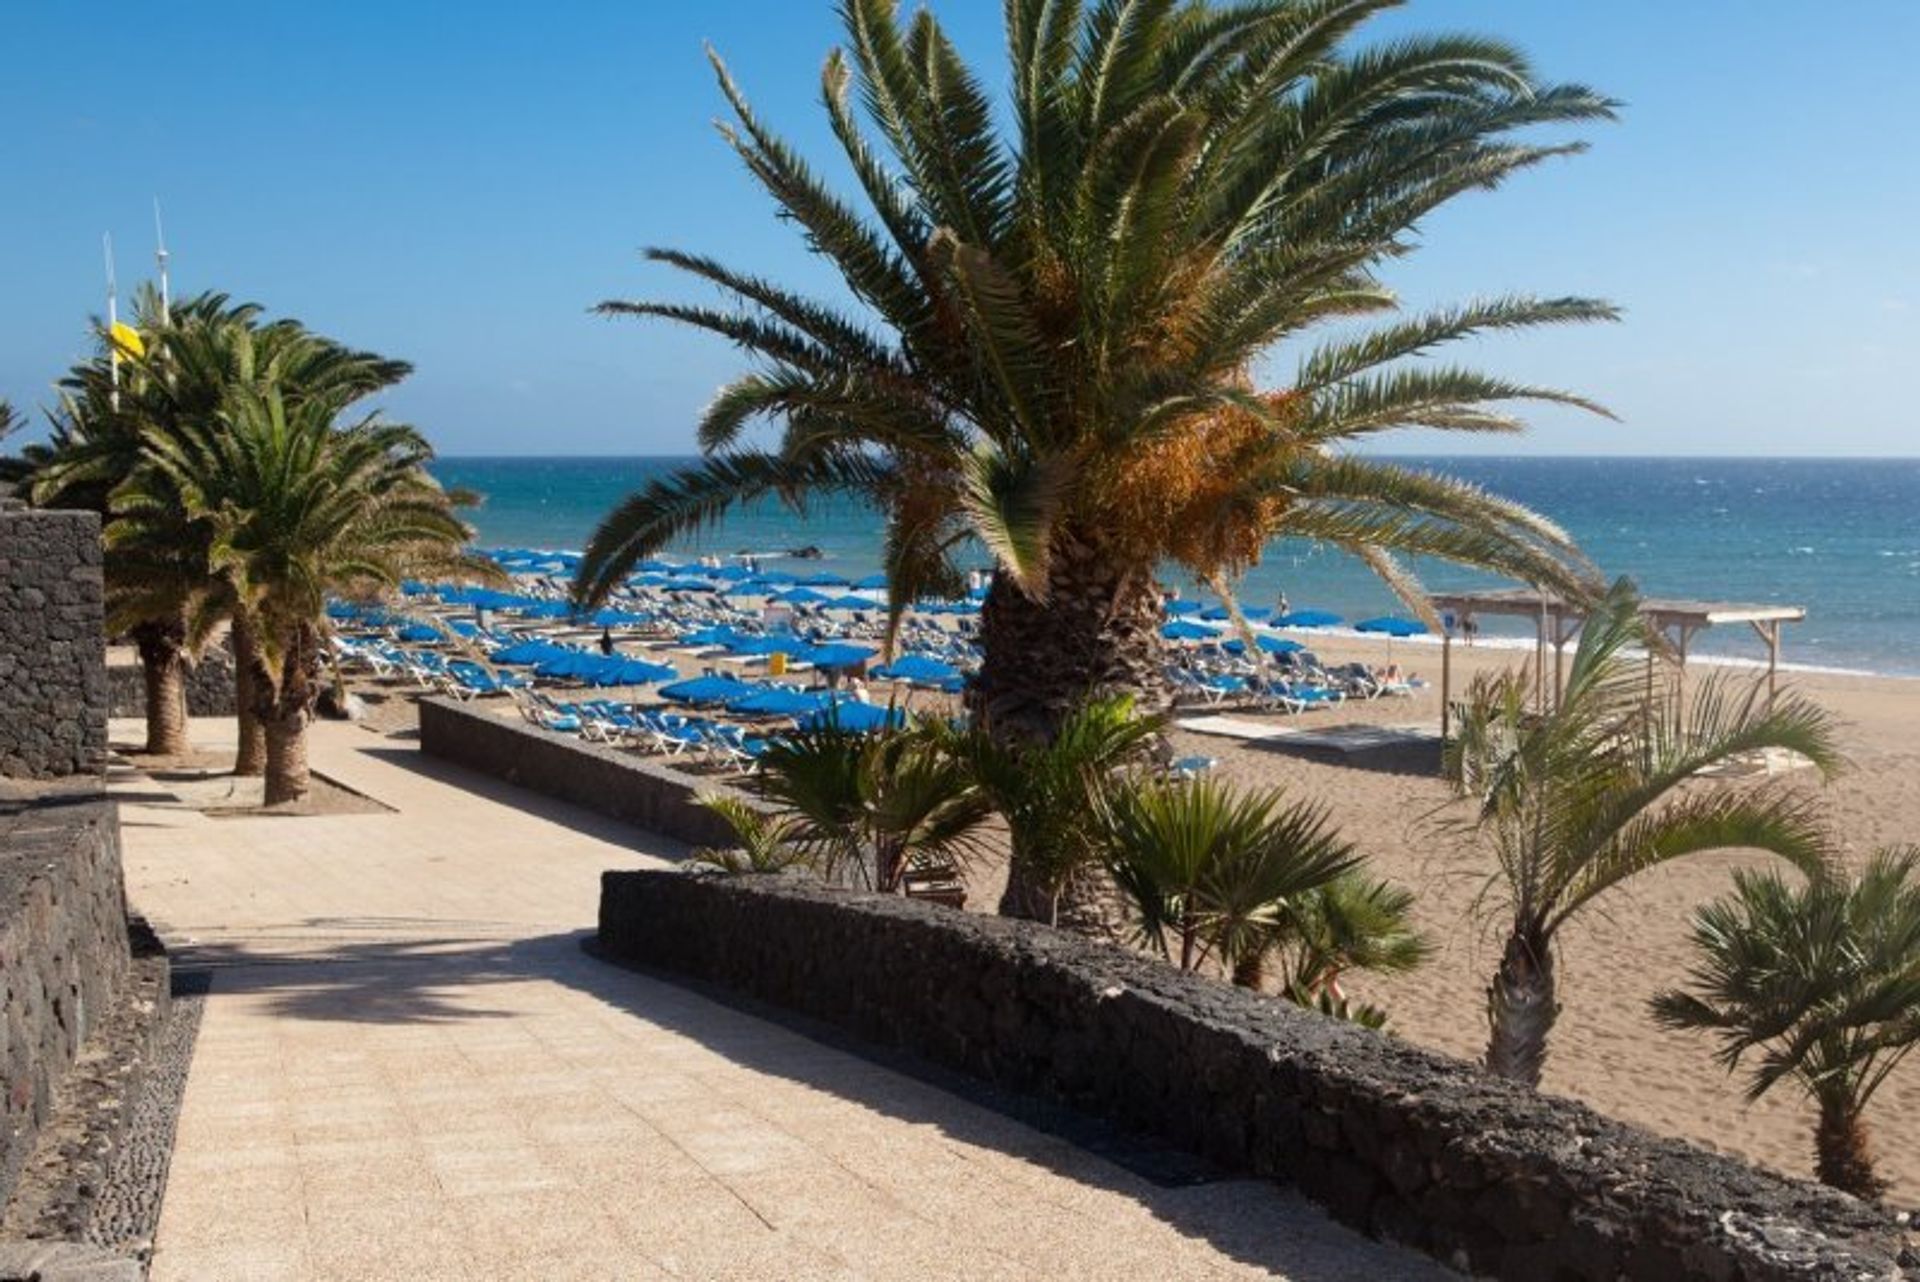 Take a sunset stroll down the palm-lined beach promenade of vibrant Puerto del Carmen